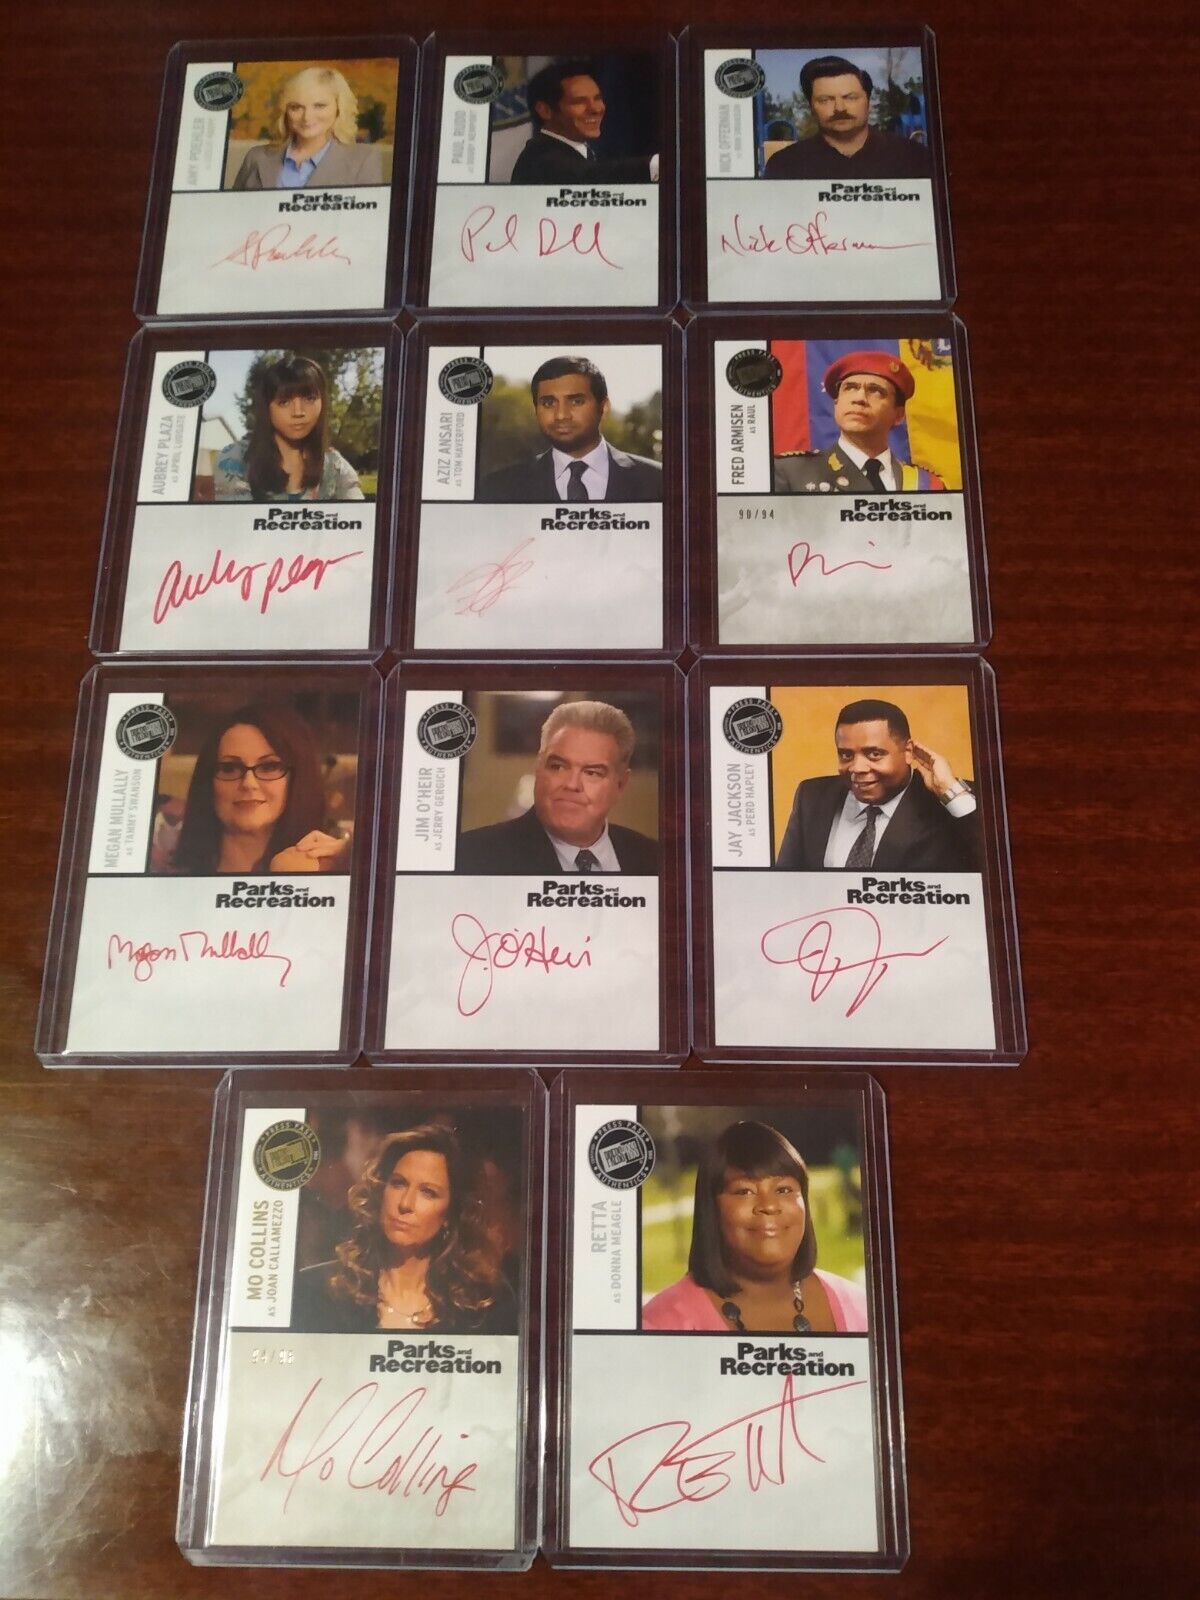 2013 Press Pass Parks and Recreation Red Ink Autograph 11 Card Set Poehler, Rudd